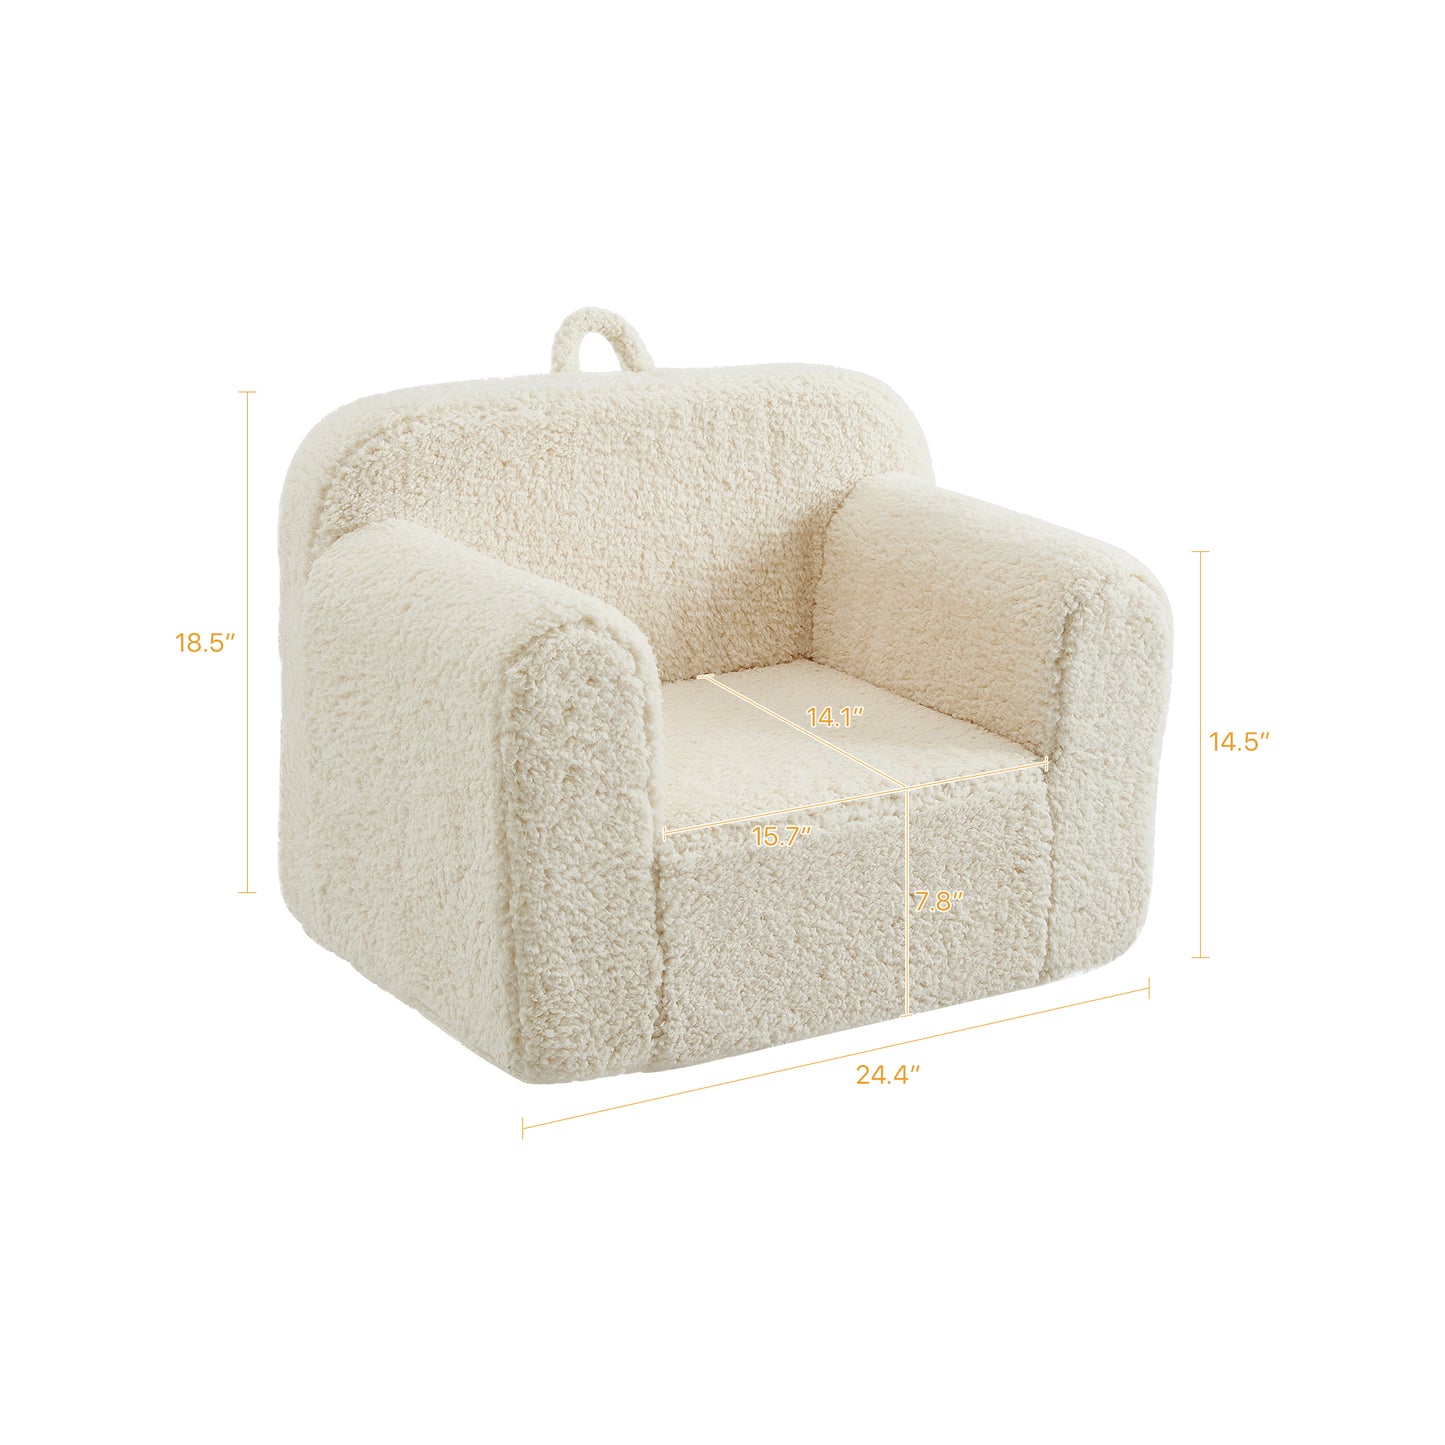 Kids Foam Sofa Chair with Removable Sherpa Slipcover for Bedroom or Playroom, Beige